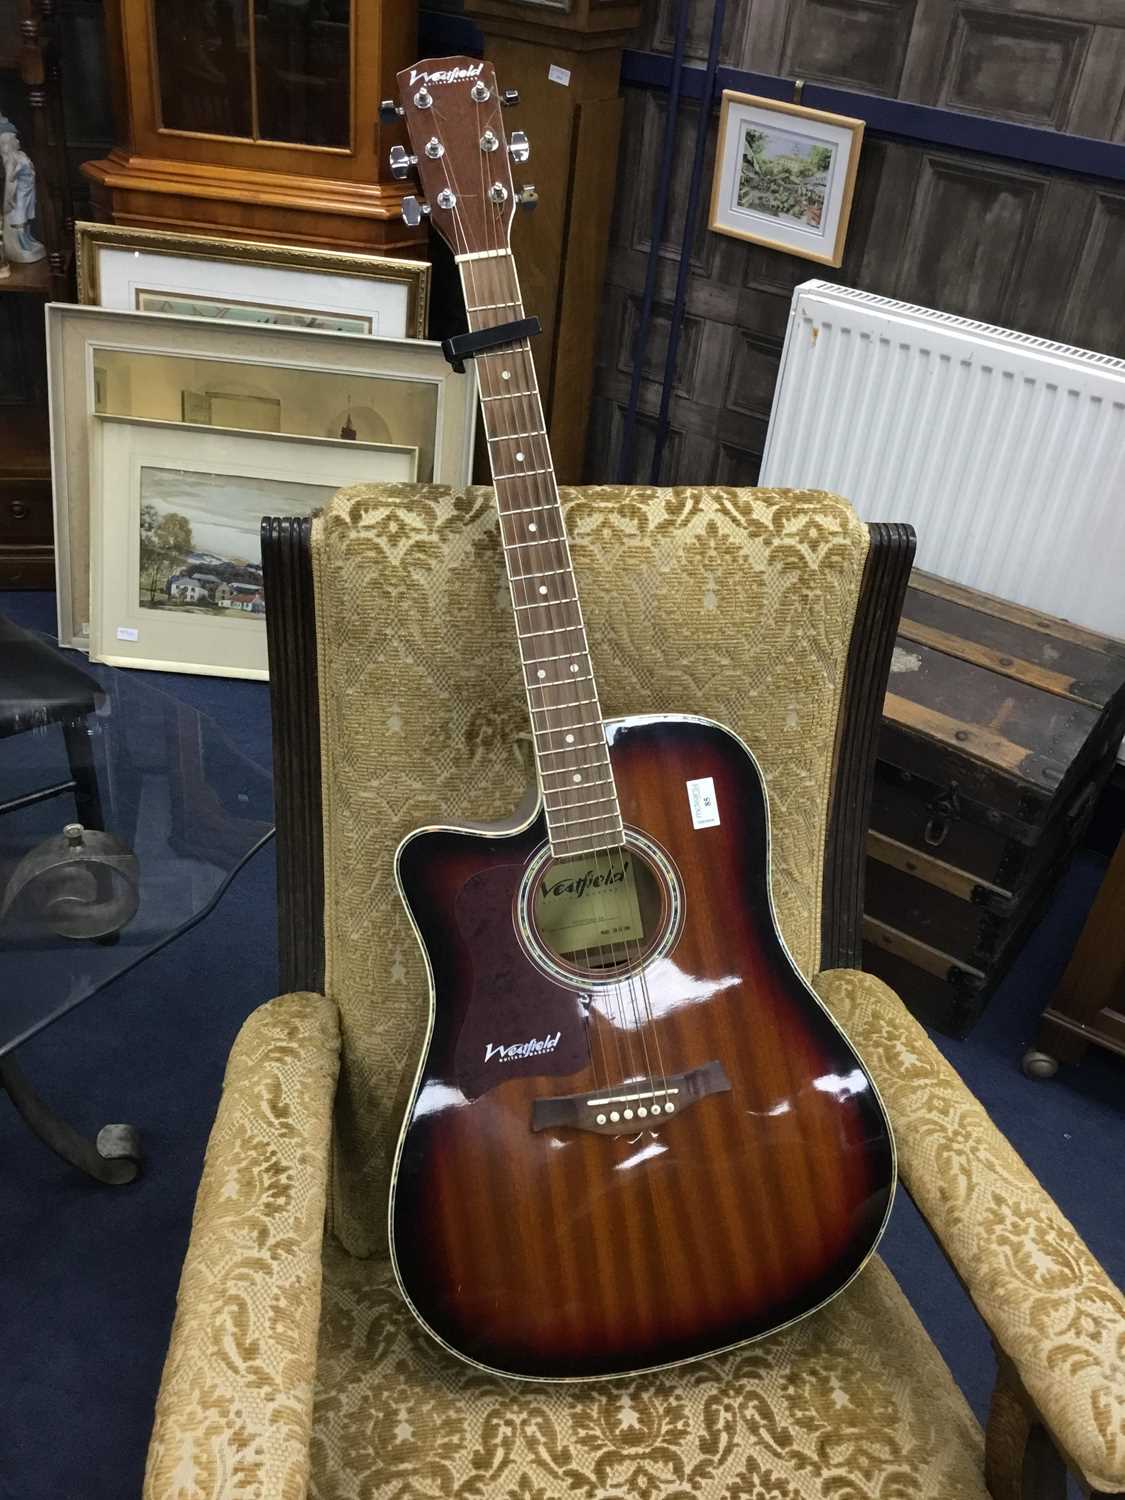 Lot 85 - A WESTFIELD ACOUSTIC GUITAR AND GUITAR ACCESSORIES